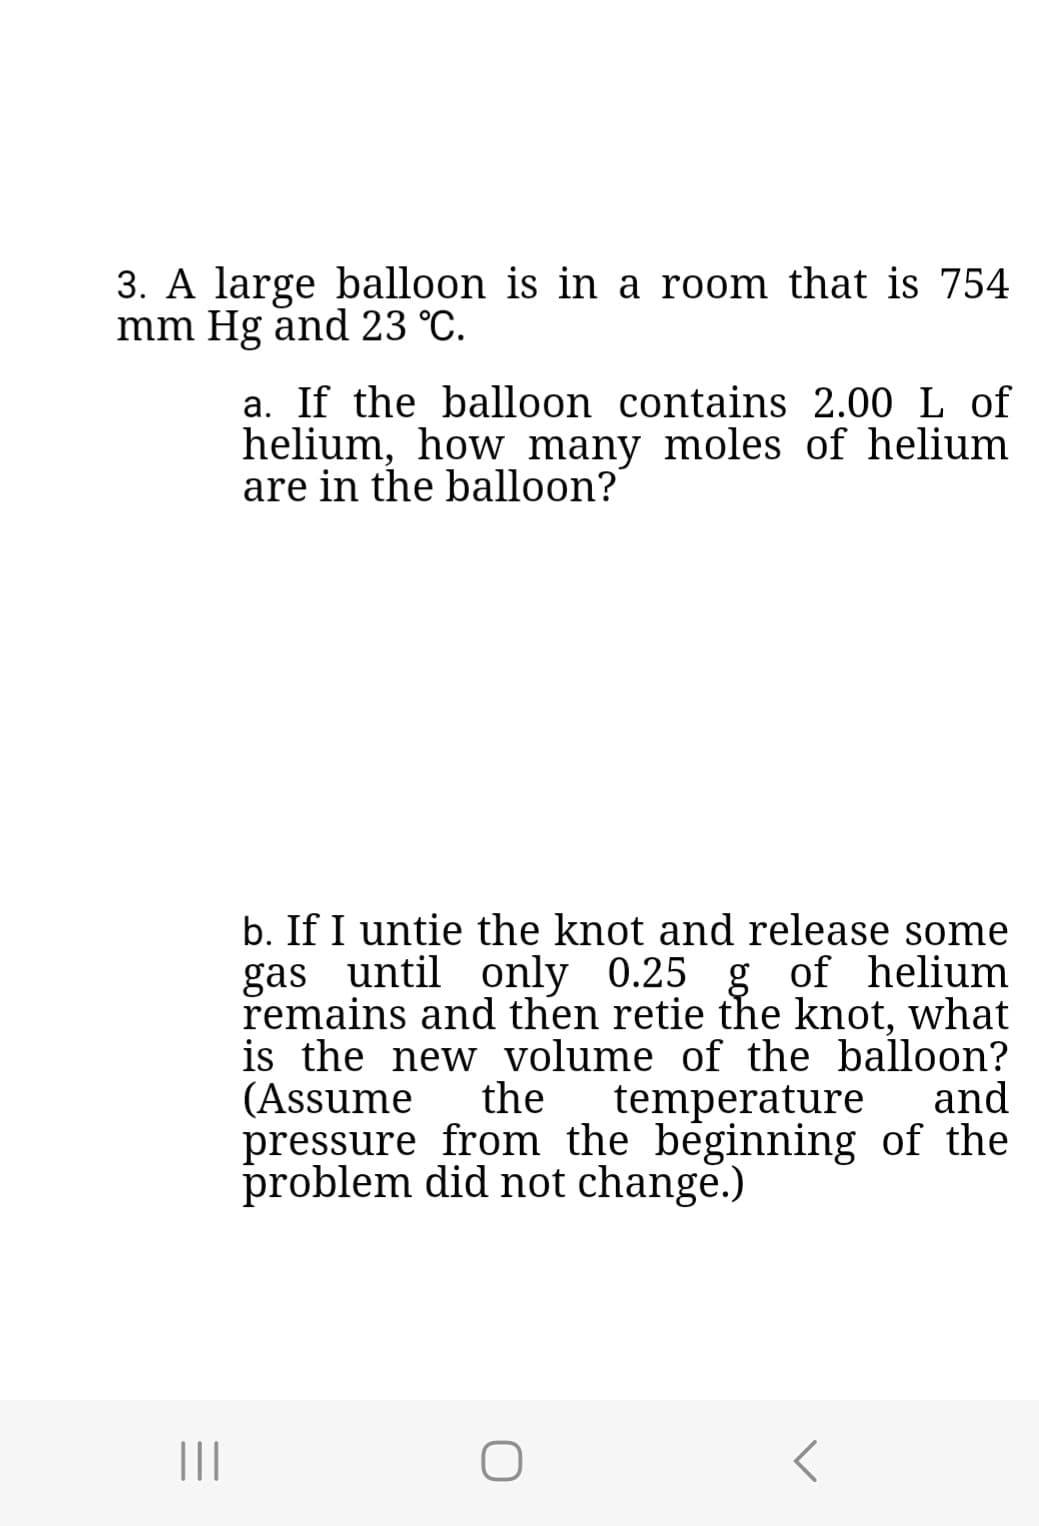 3. A large balloon is in a room that is 754
mm Hg and 23 °C.
|||
a. If the balloon contains 2.00 L of
helium, how many moles of helium
are in the balloon?"
b. If I untie the knot and release some
gas until only 0.25 g of helium
remains and then retie the knot, what
is the new volume of the balloon?
(Assume the temperature and
pressure from the beginning of the
problem did not change.)
r